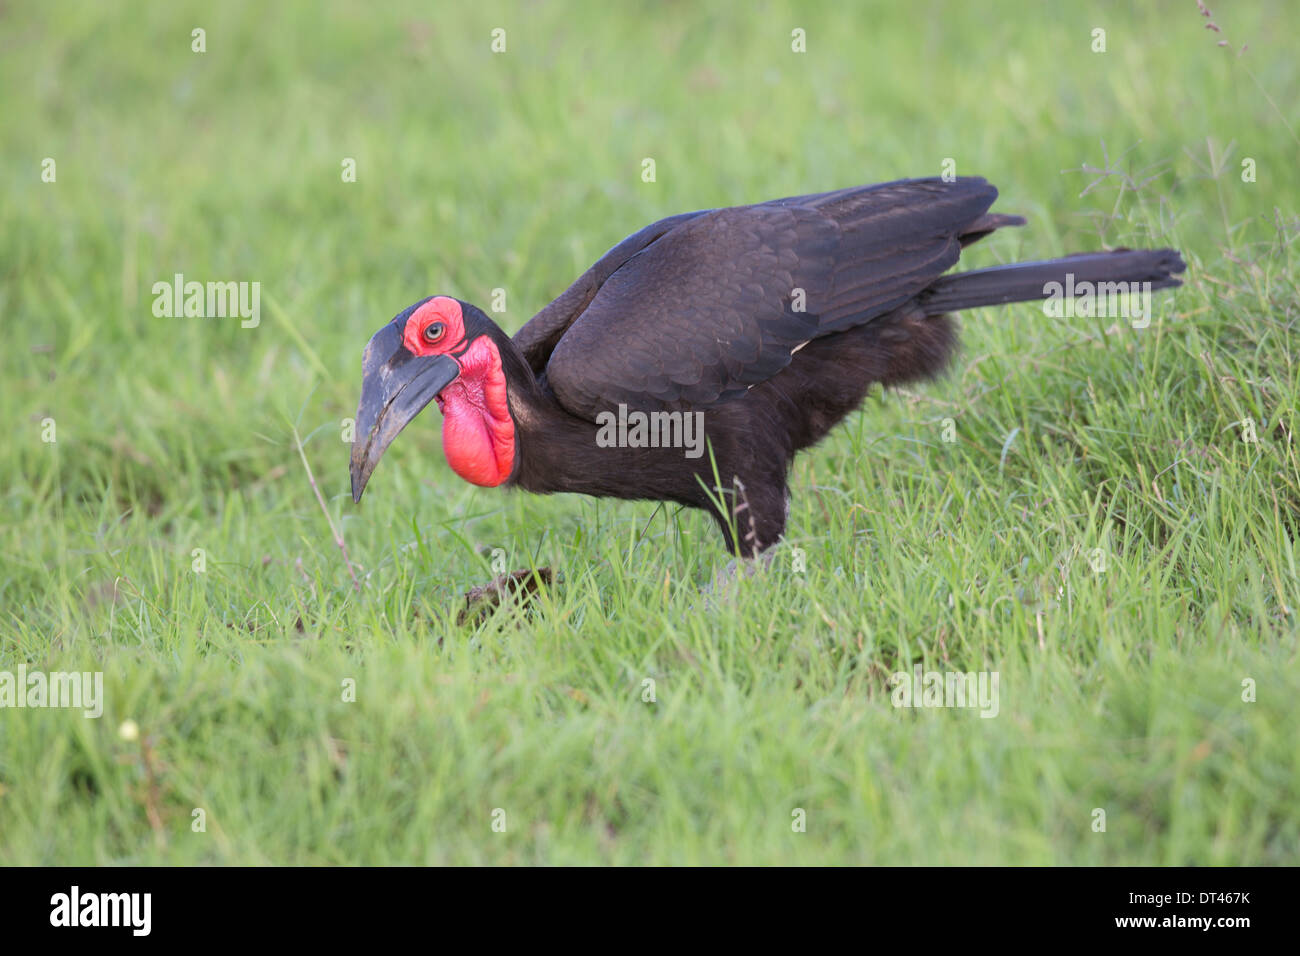 The Southern Ground Hornbill ( Bucorvus leadbeateri ) also known as Bucorvus cafer Stock Photo